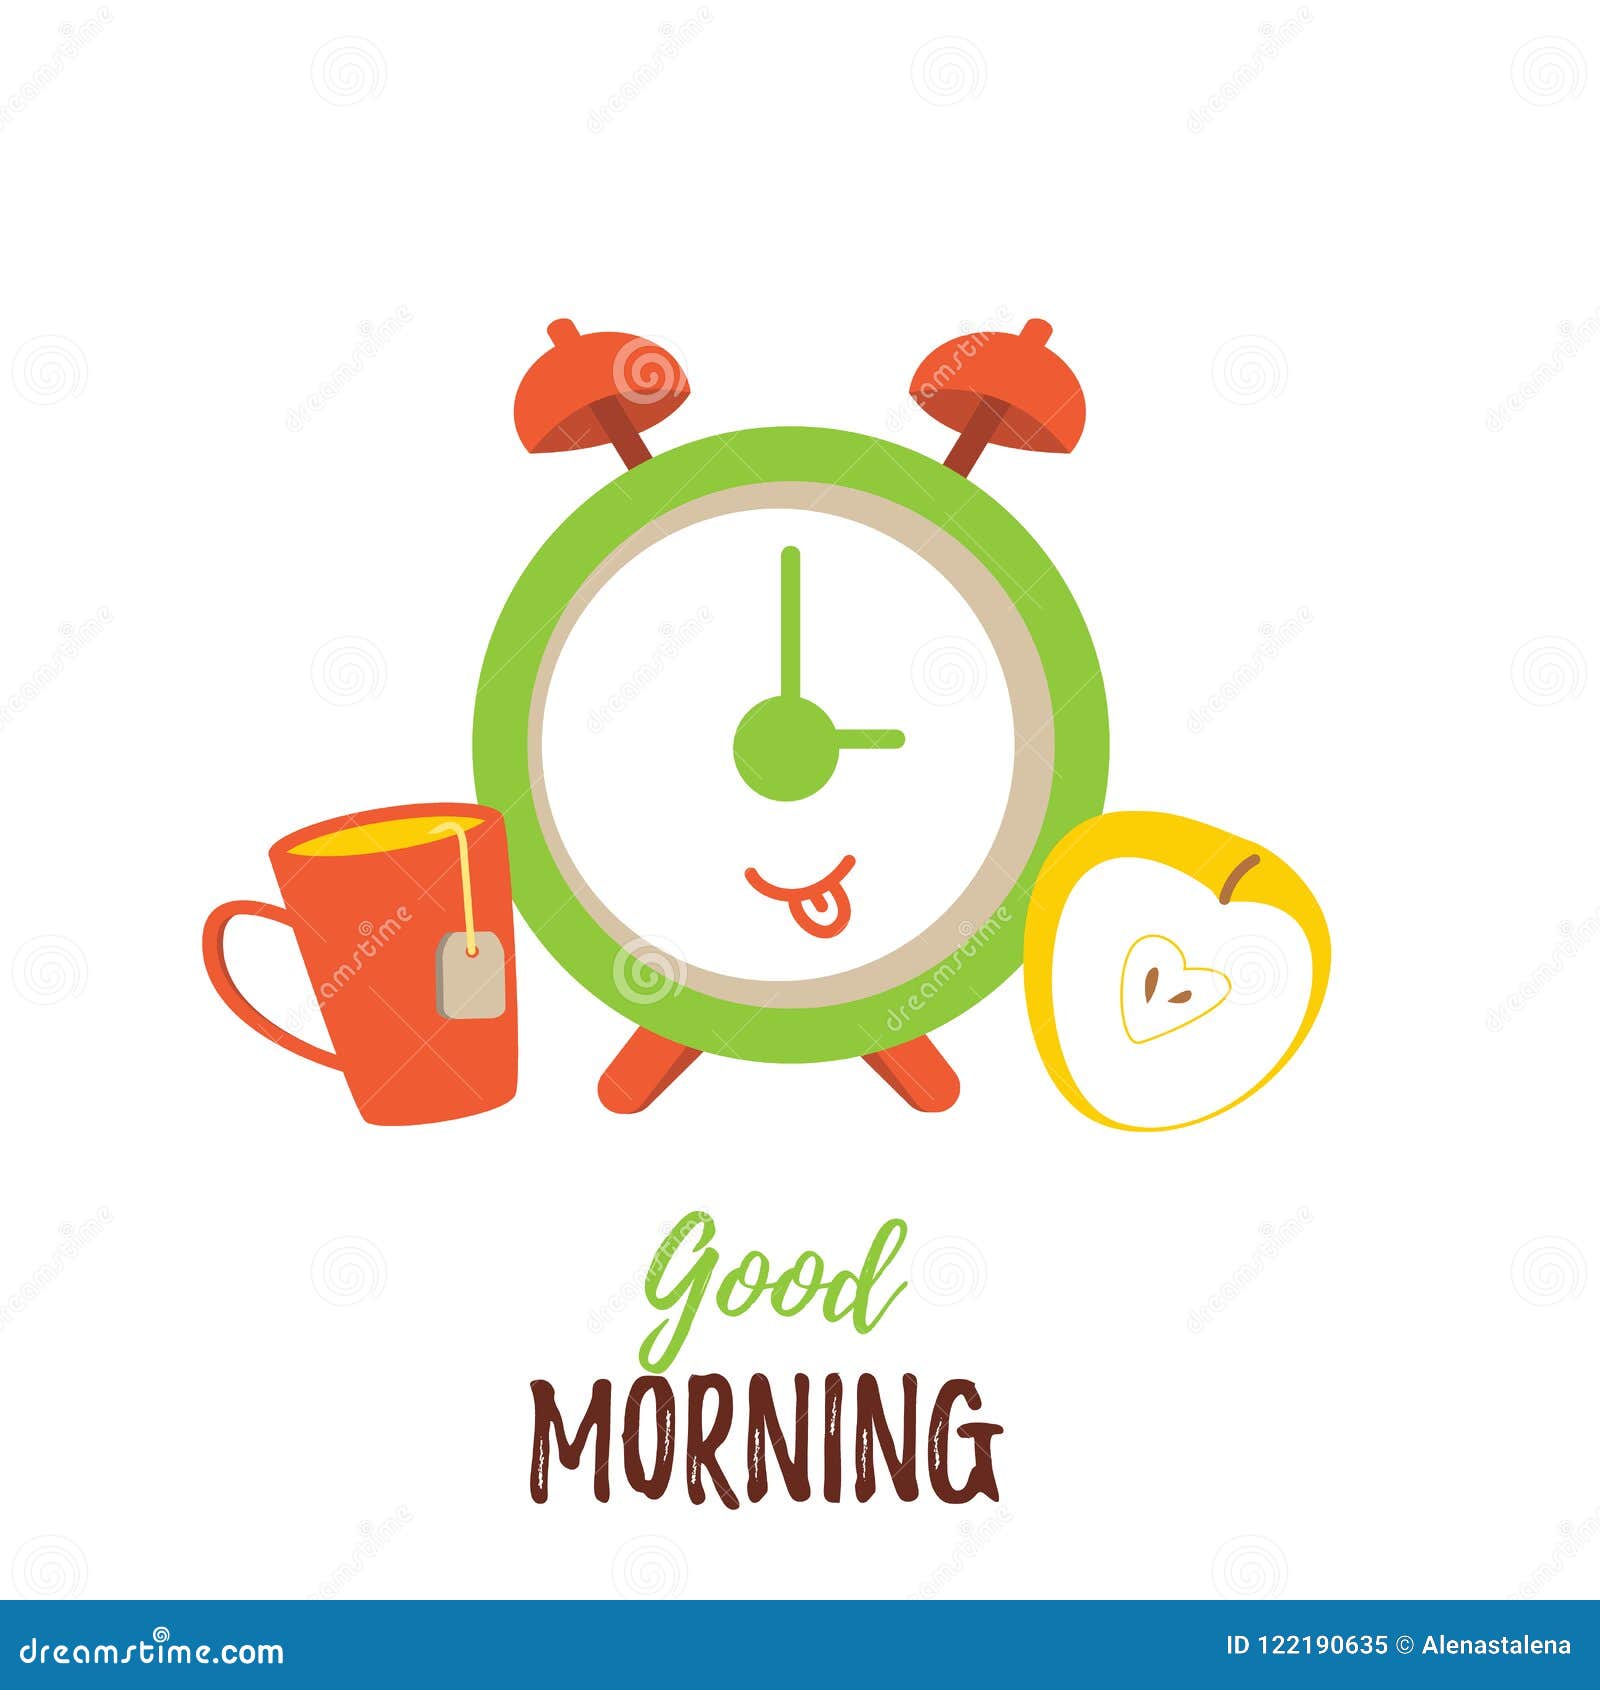 Good Morning Cartoon Poster with Cute Tea Cup, Apple and Clock ...